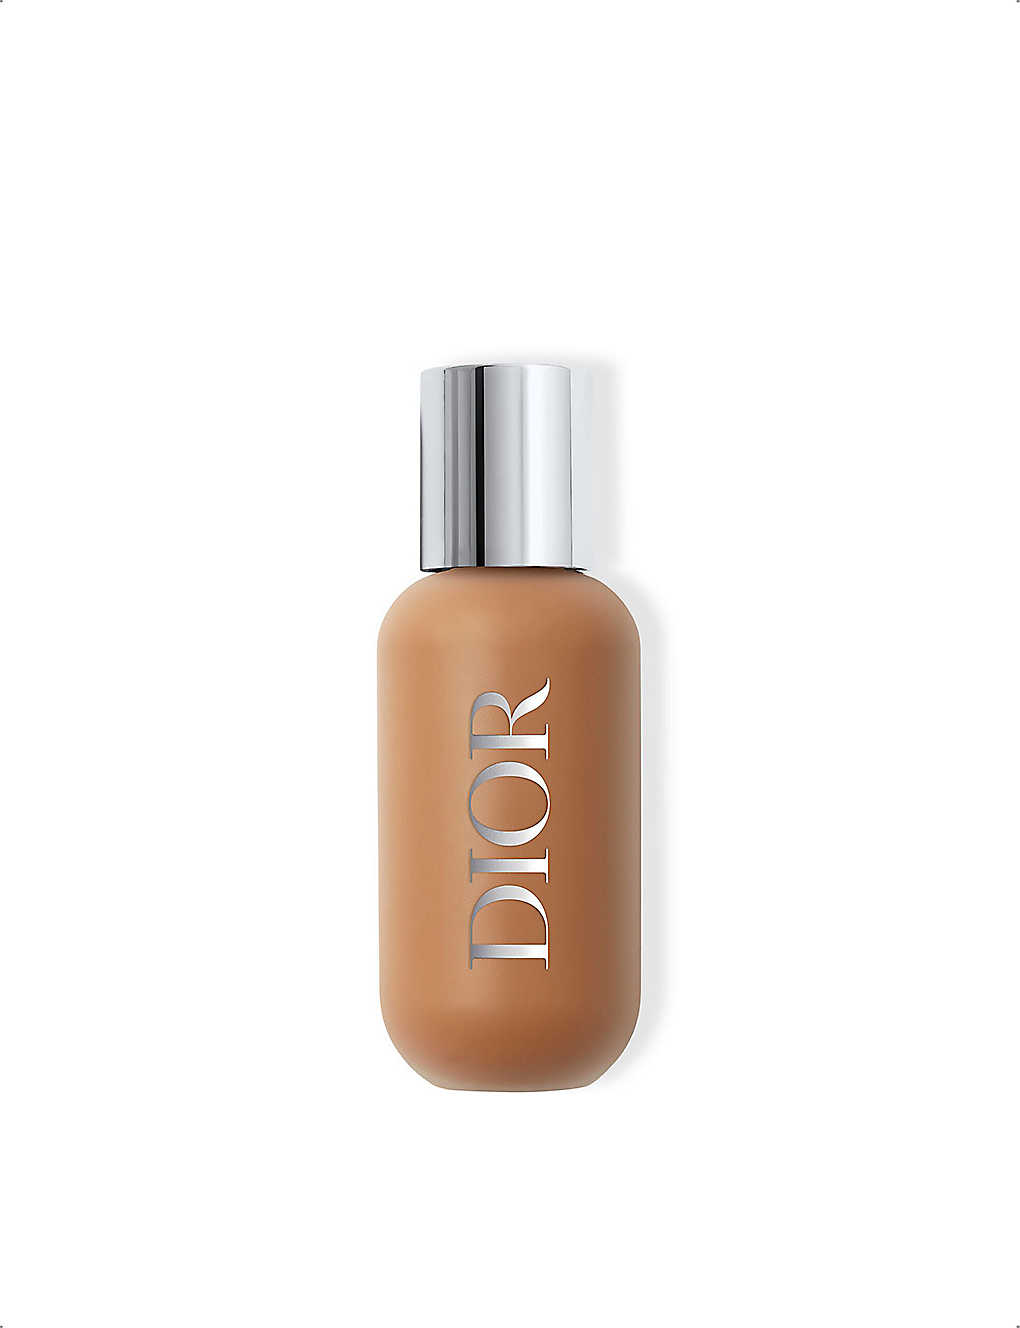 Dior Backstage Face & Body Foundation 50ml In 6n